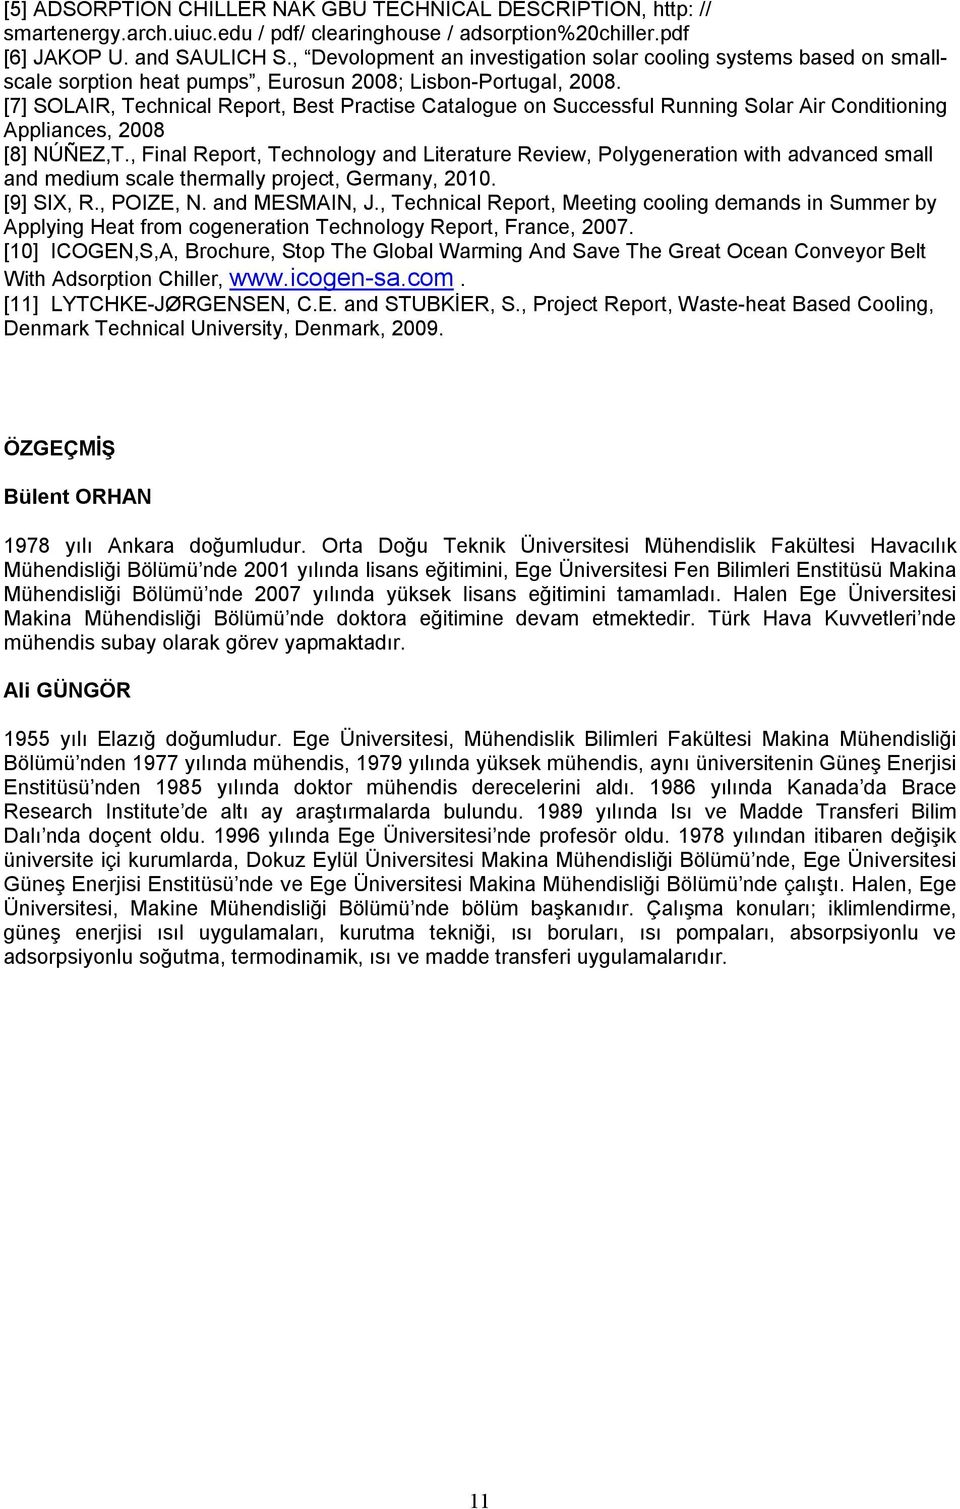 [7] SOLAIR, Technical Report, Best Practise Catalogue on Successful Running Solar Air Conditioning Appliances, 2008 [8] NÚÑEZ,T.